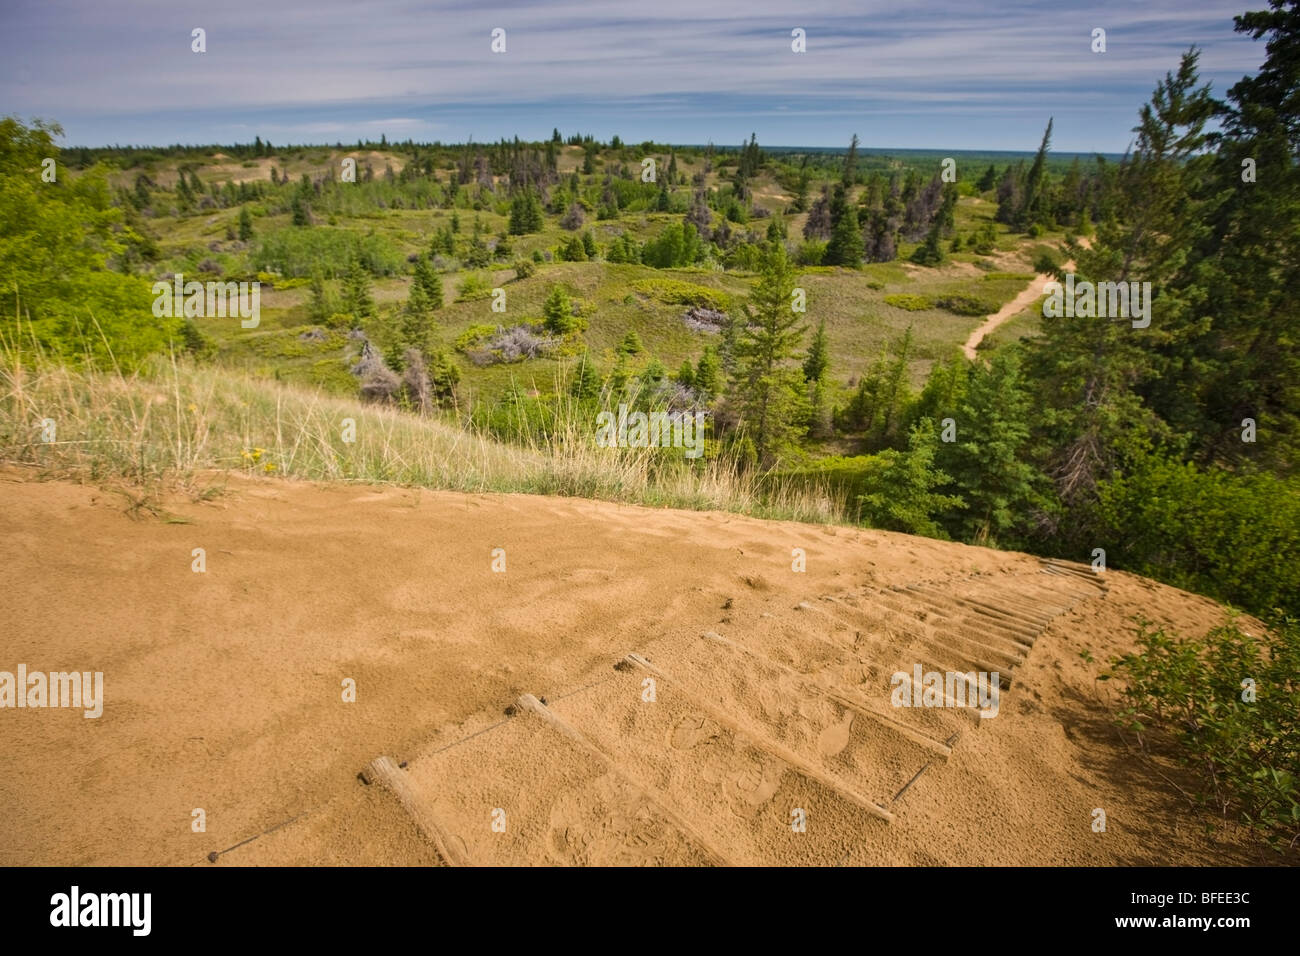 Overview of the Spirit Sands trail from atop a sand dune in Spruce Woods Provincial Park, Manitoba, Canada Stock Photo